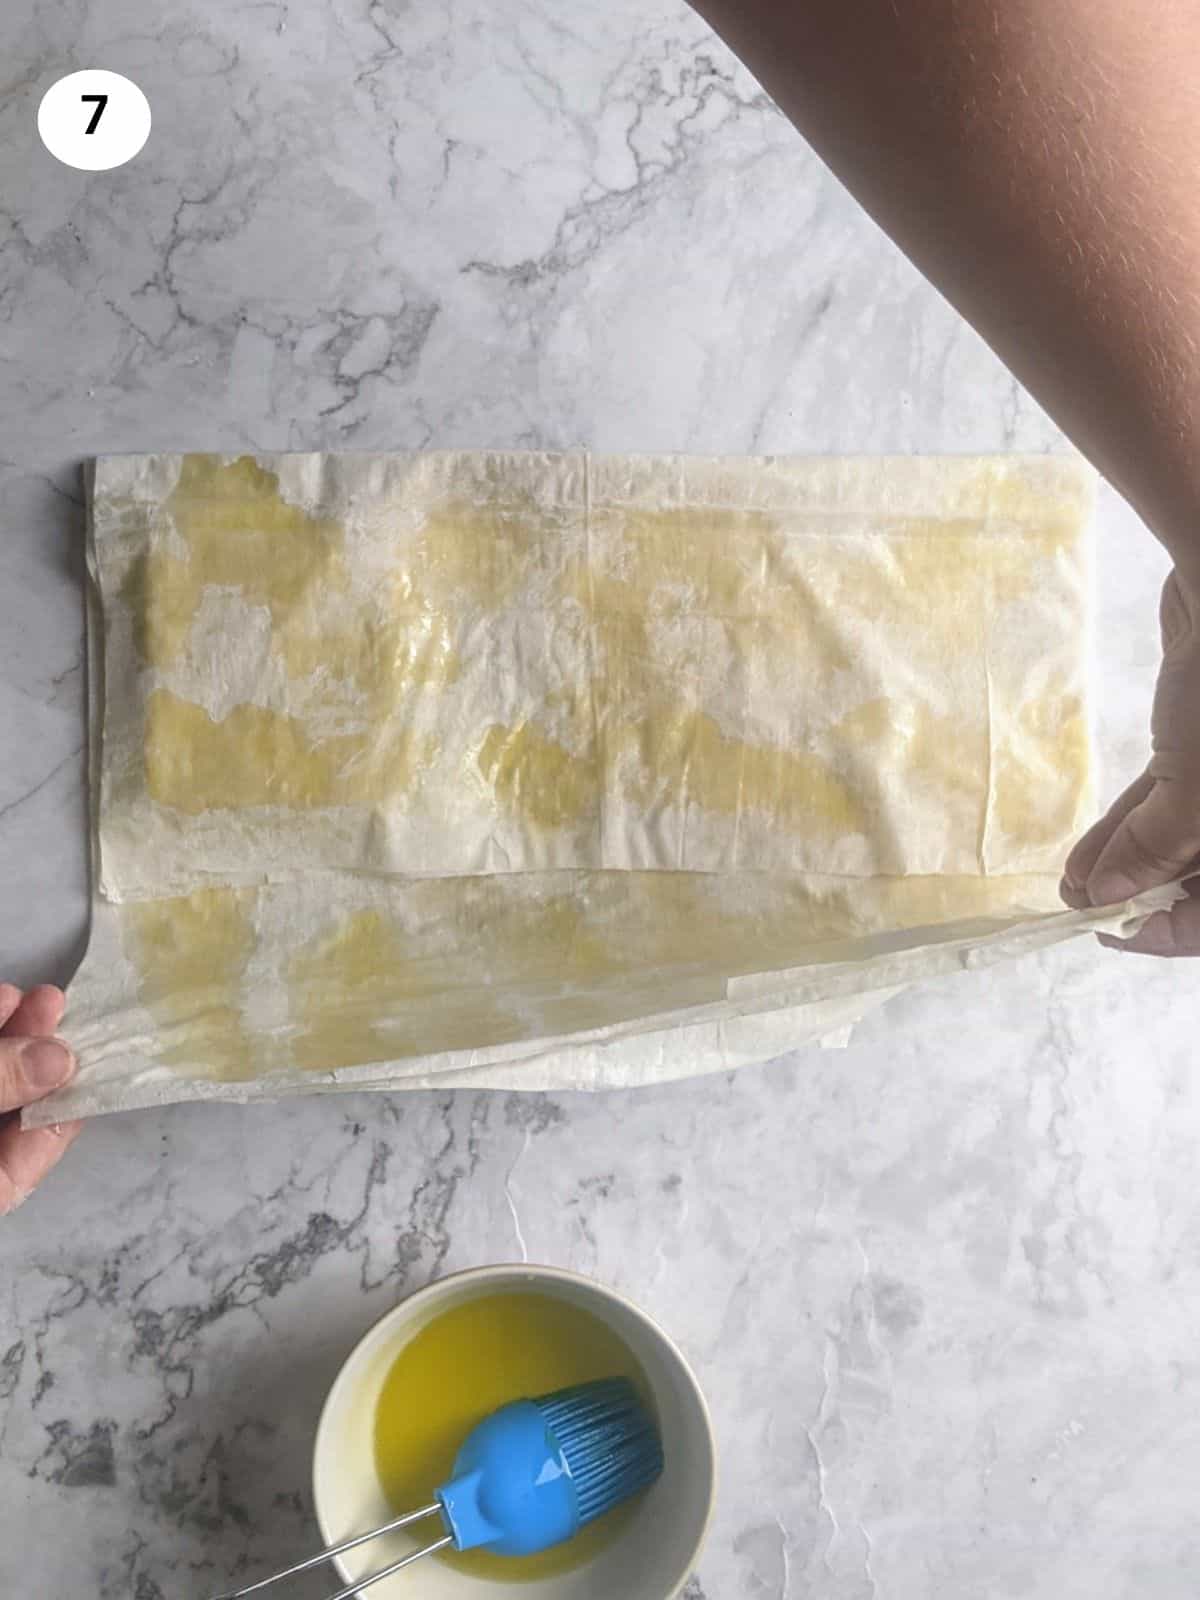 Folding the right side on top of the feta block.